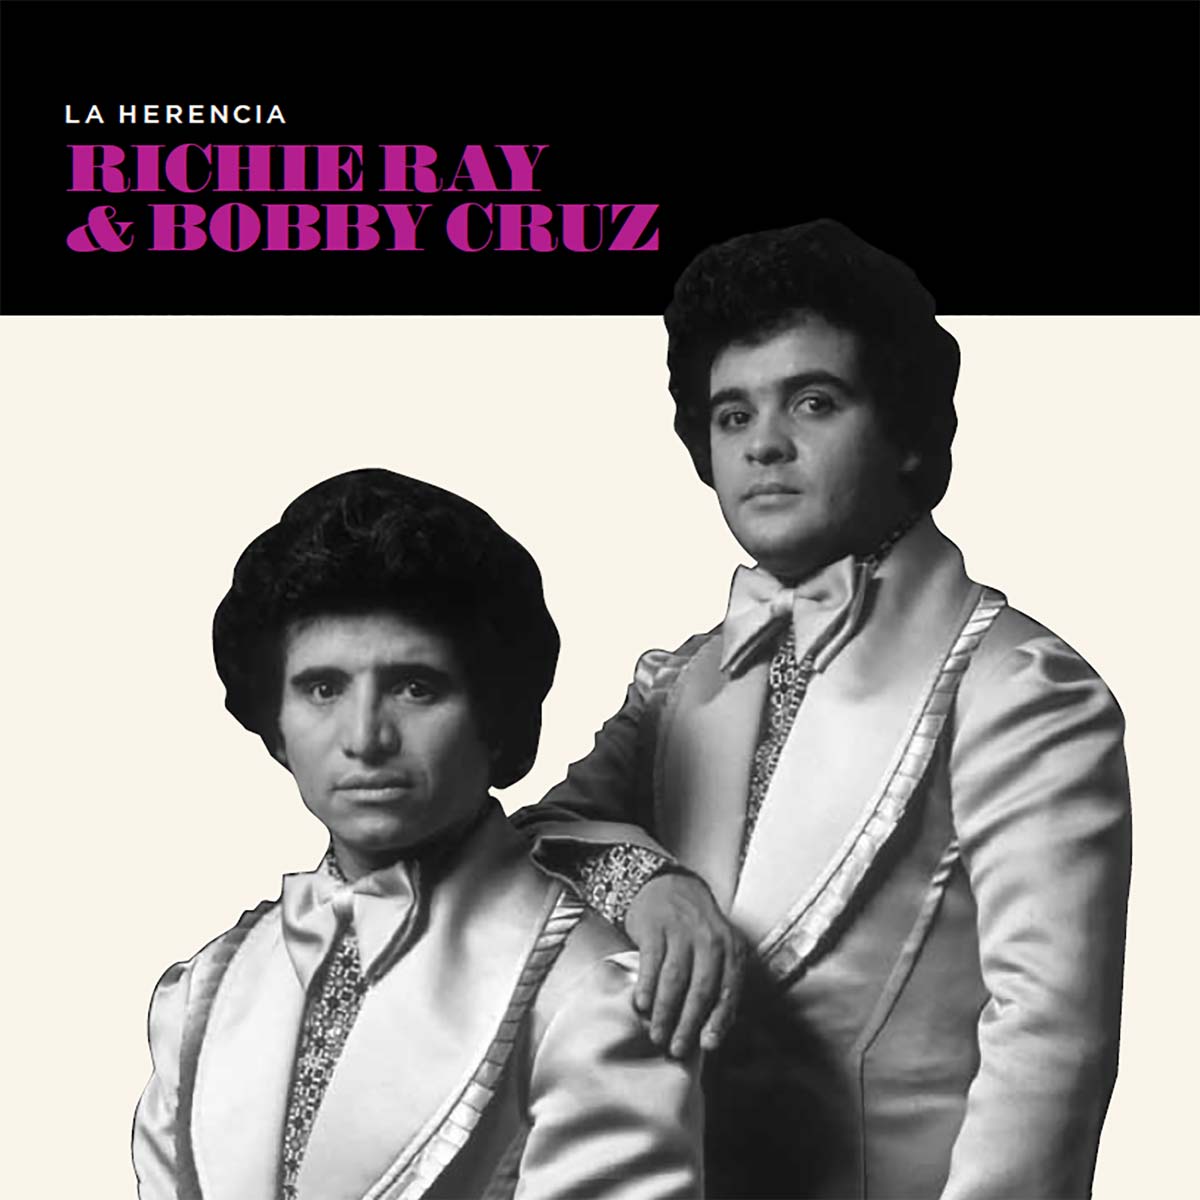 Featured Image for “RICHIE RAY AND BOBBY CRUZ – LA HERENCIA”